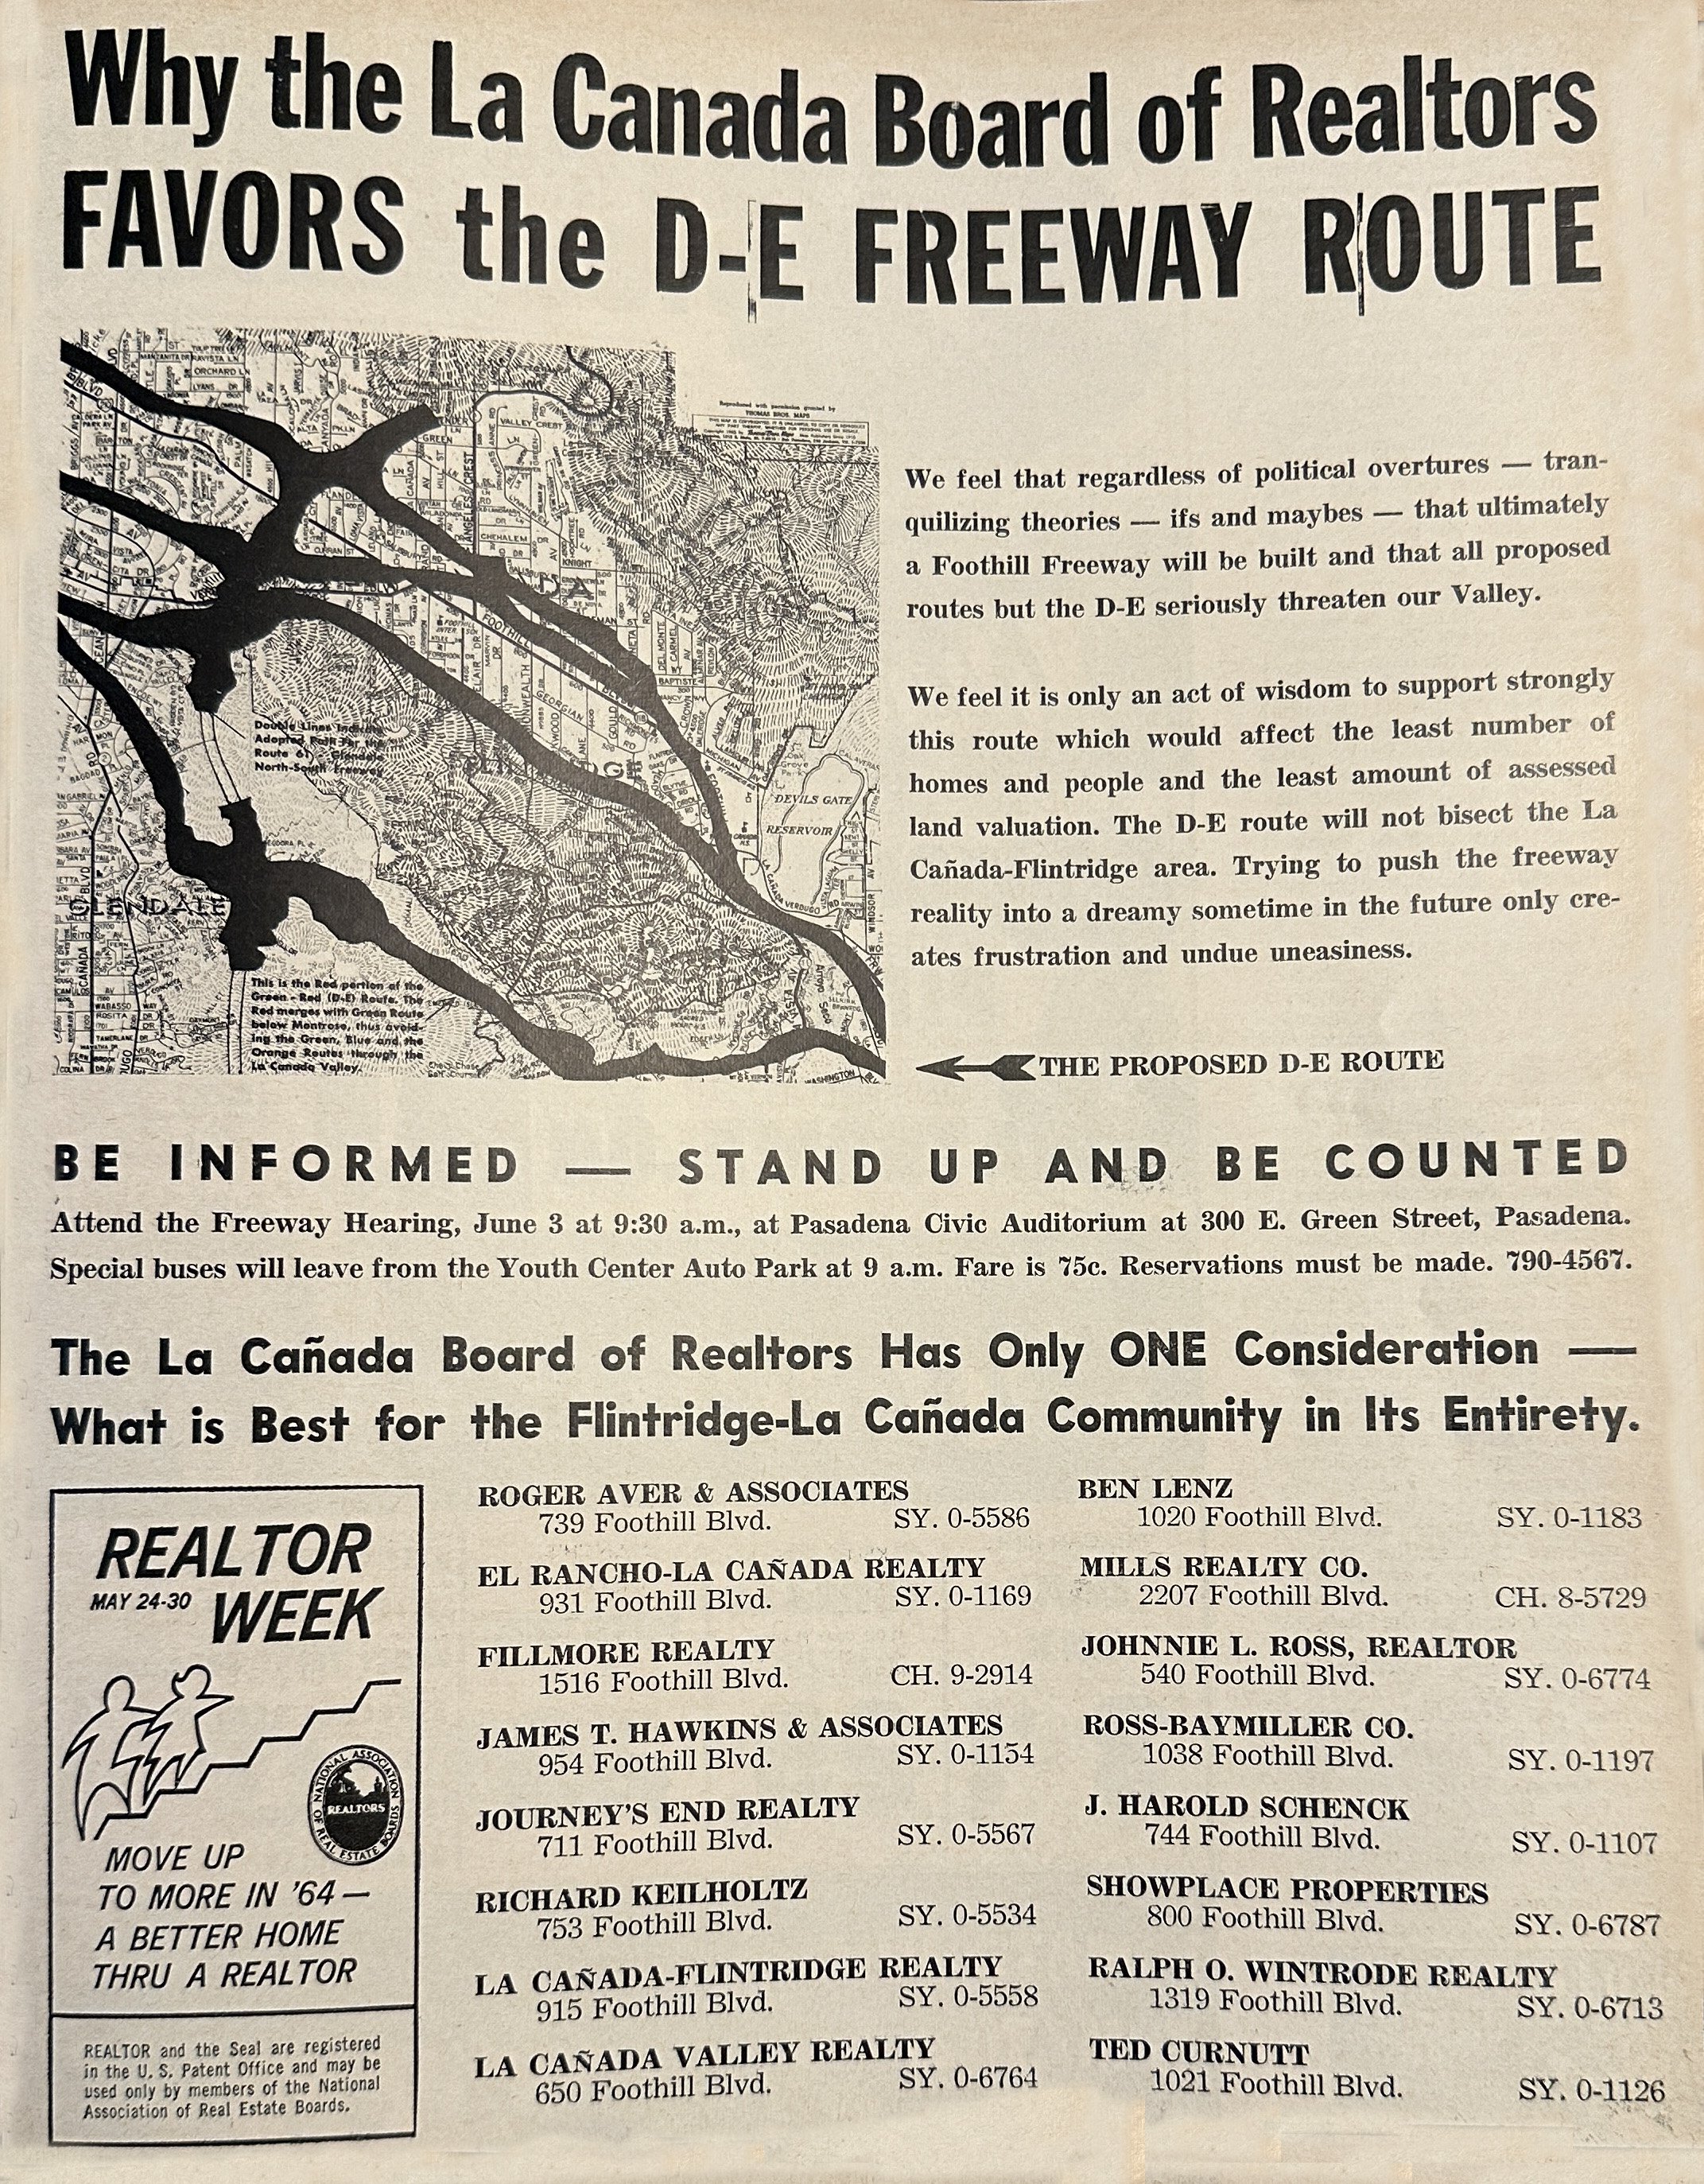  Advertisement in the La Cañada Valley Sun from local realtors supporting the D-E Route, May 21, 1964 